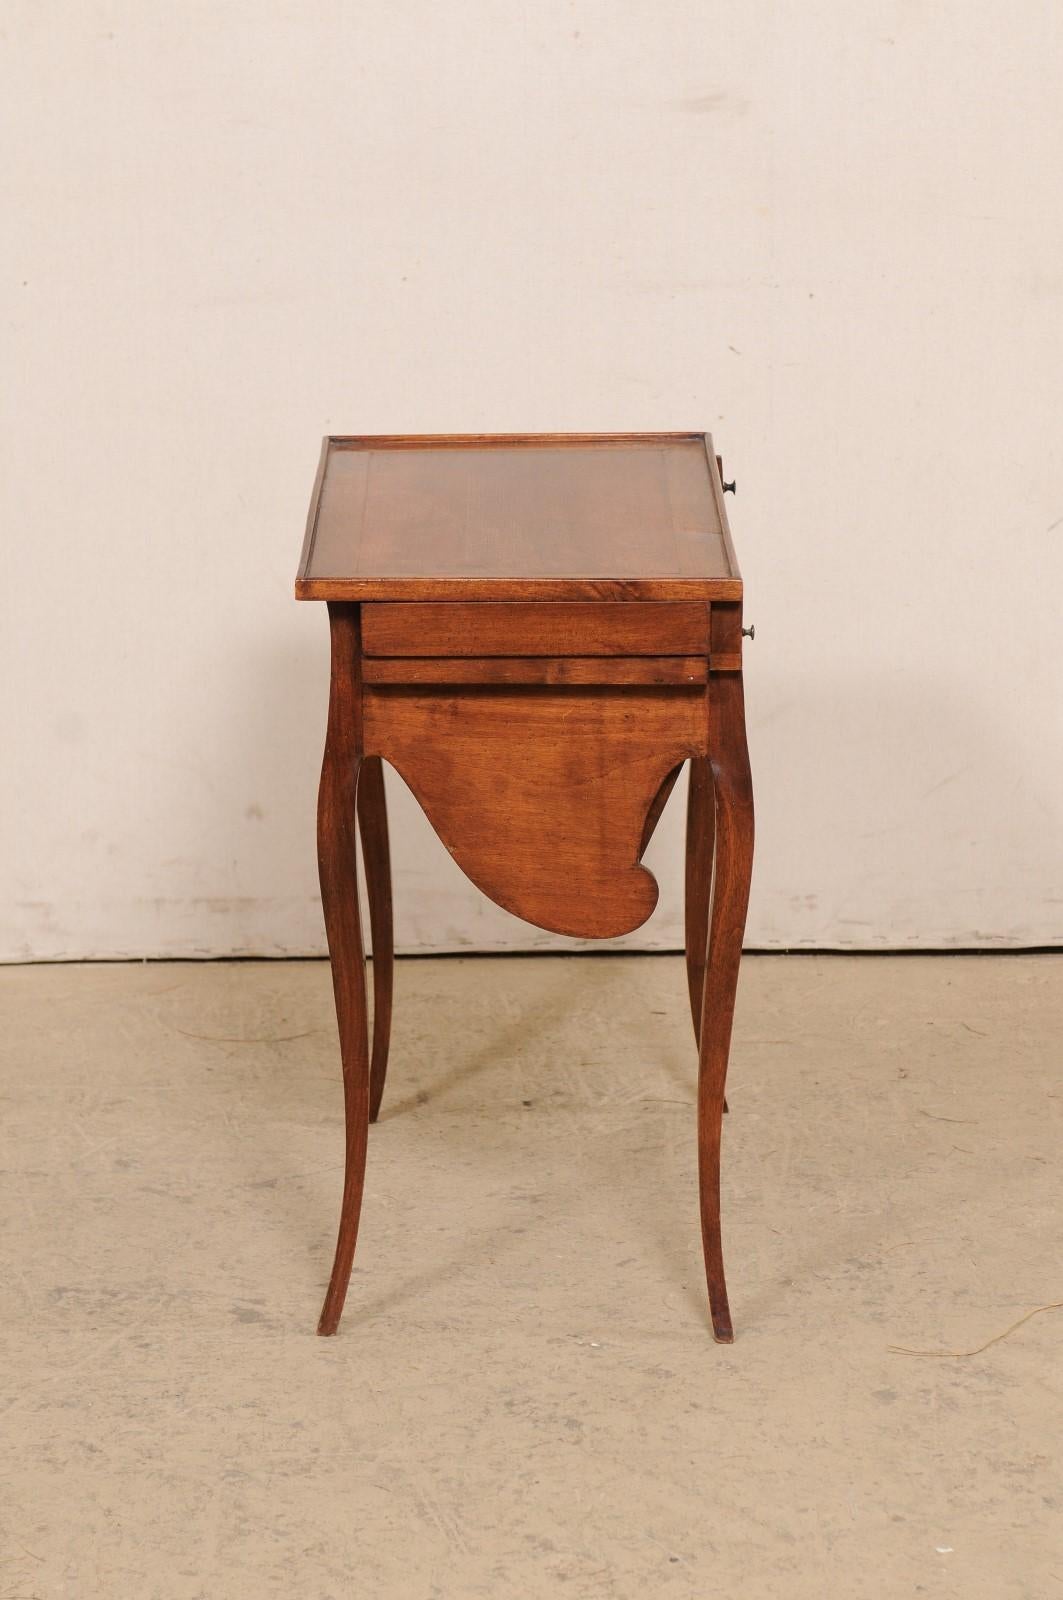 French 19th C. Table w/ Unusual & Creative Drop Down Storage-Great for Crafting 6